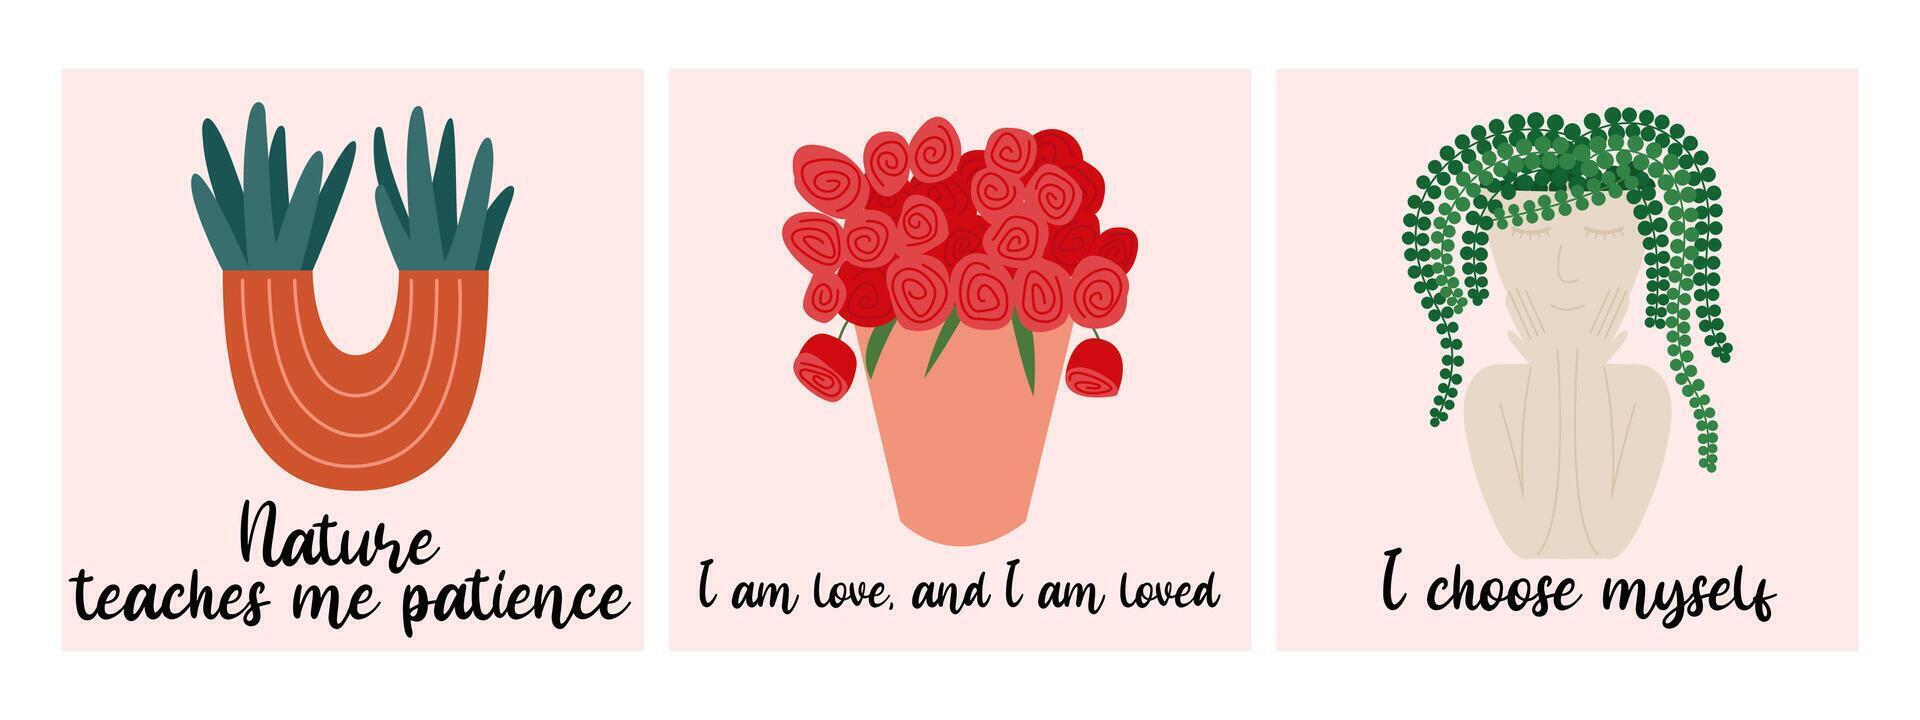 Affirmation cards set. Positive quotes and phrases vector flat style set